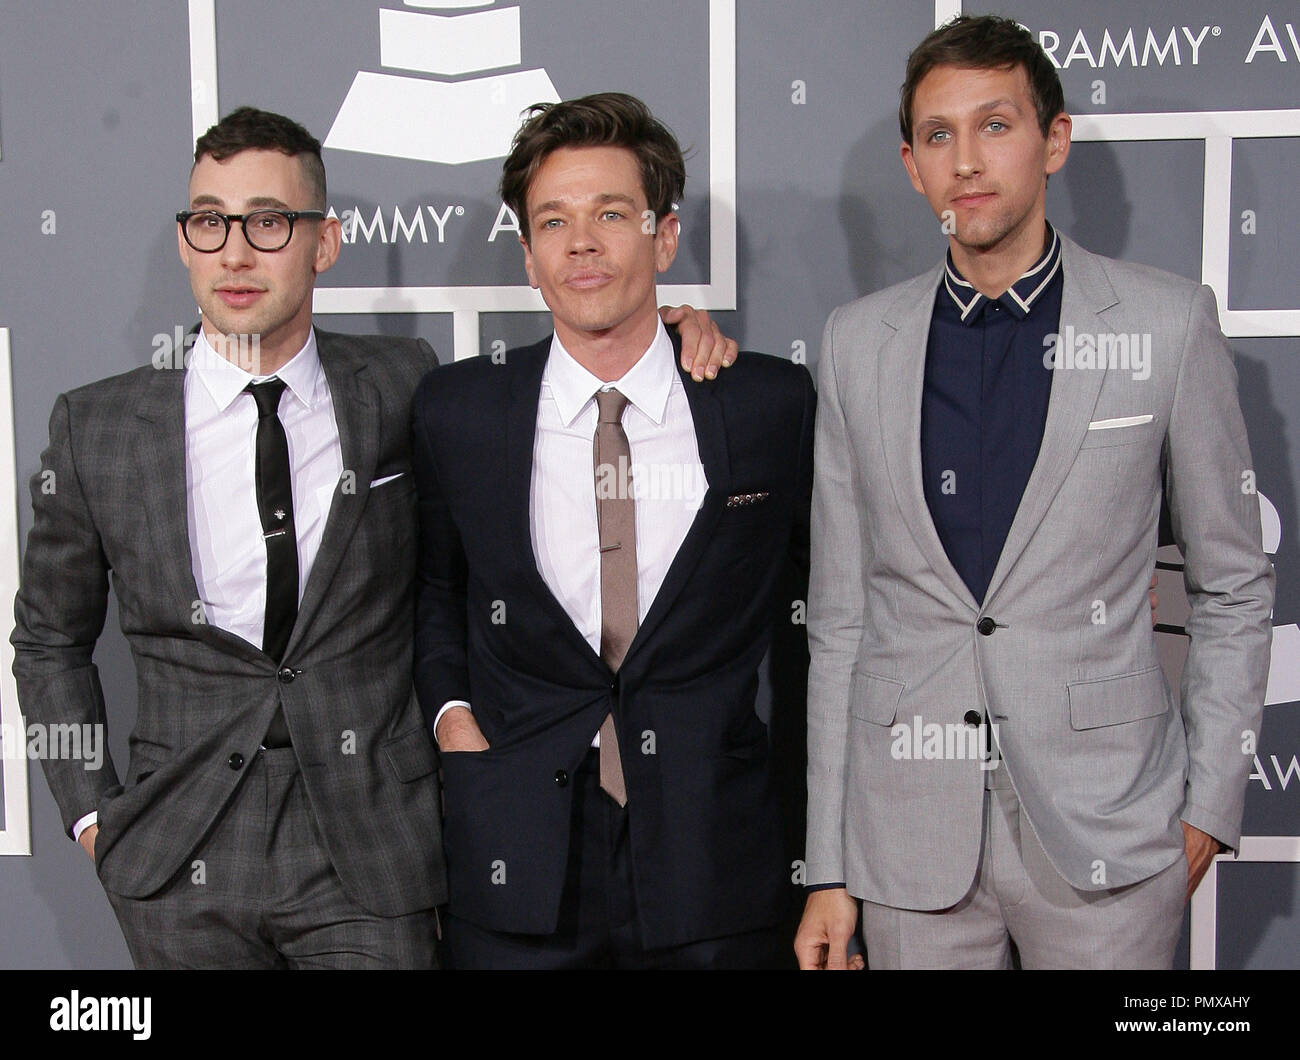 Fun at the 55th Annual Grammy Awards held at the Staples Center in Los Angeles, CA.The event took place on Sunday, February 10, 2013. Photo by PRPP / PictureLux  File Reference # 31836 079PRPP  For Editorial Use Only -  All Rights Reserved Stock Photo